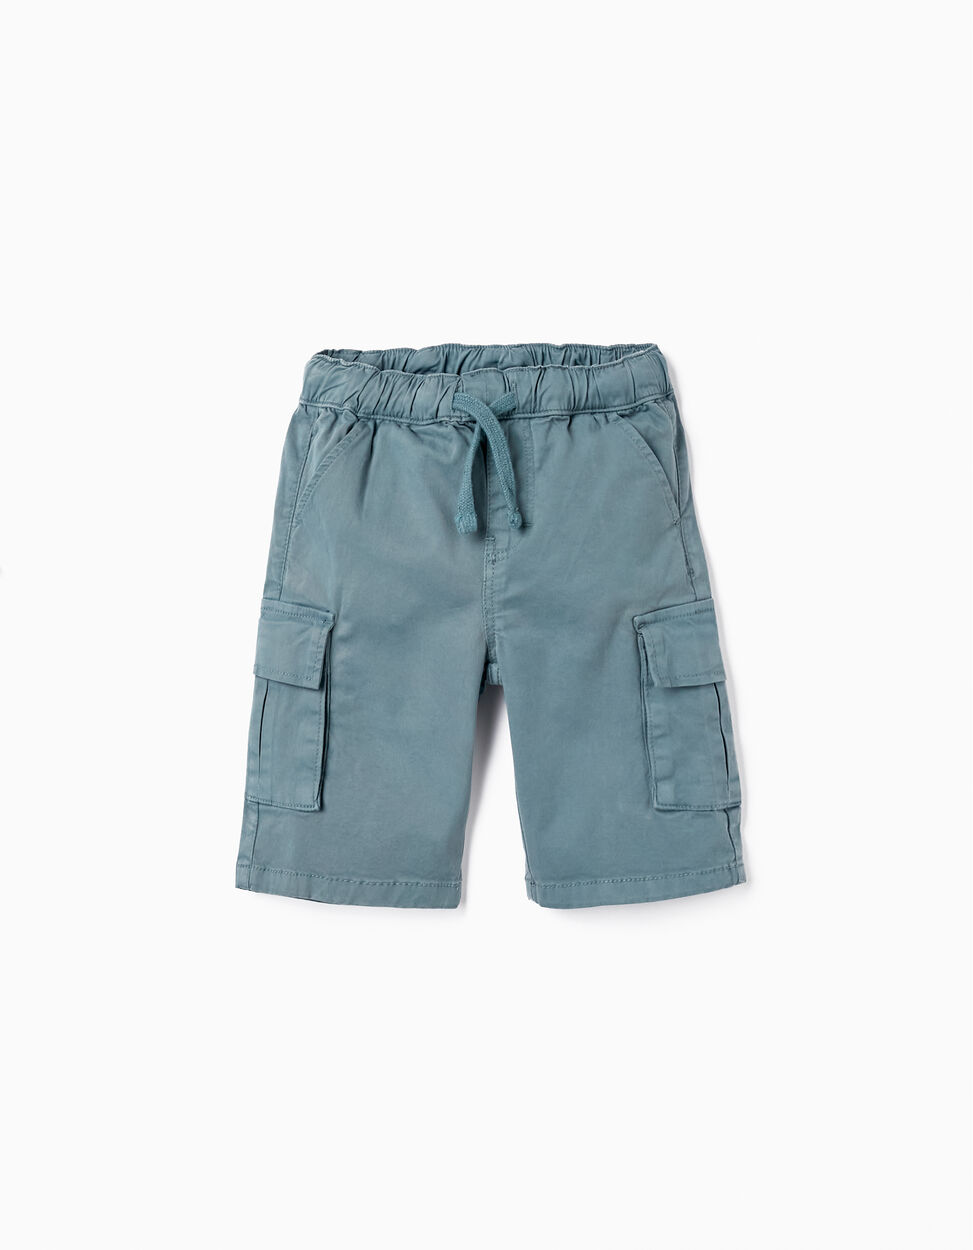 Buy Online Suede Twill Sports Shorts for Boys, Green